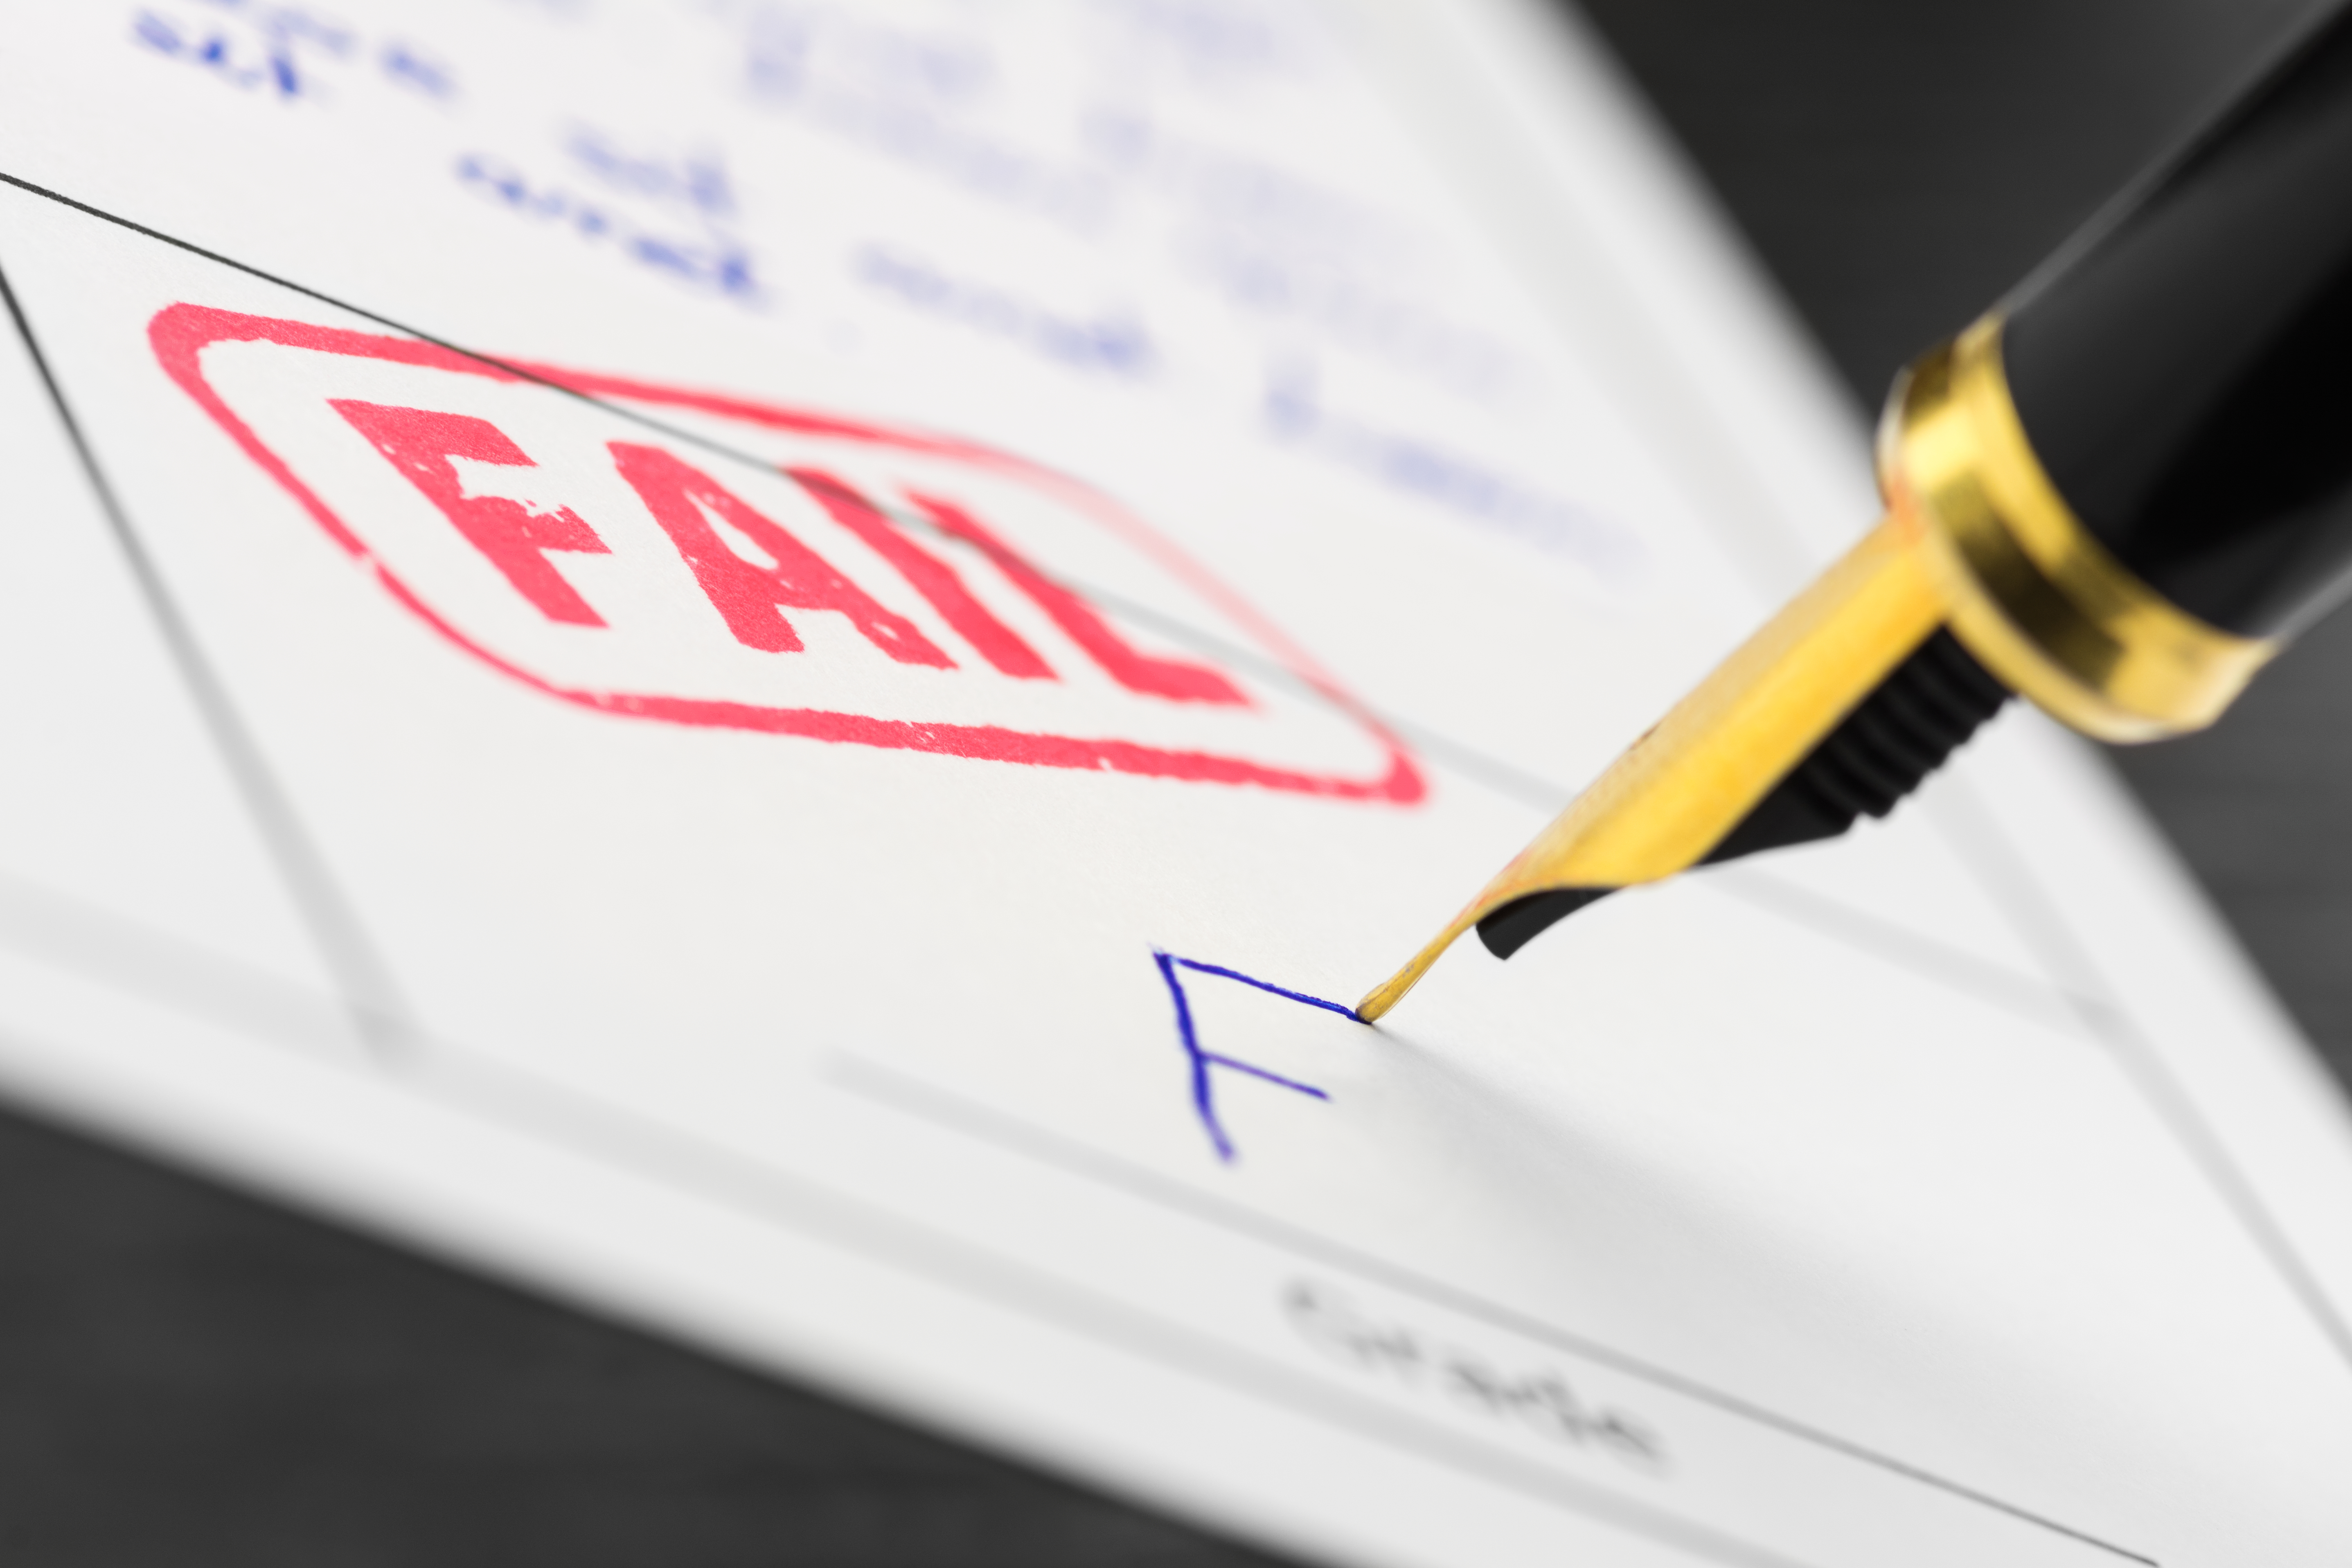 An assignment with a red "Fail" stamp on it | Source: Shutterstock